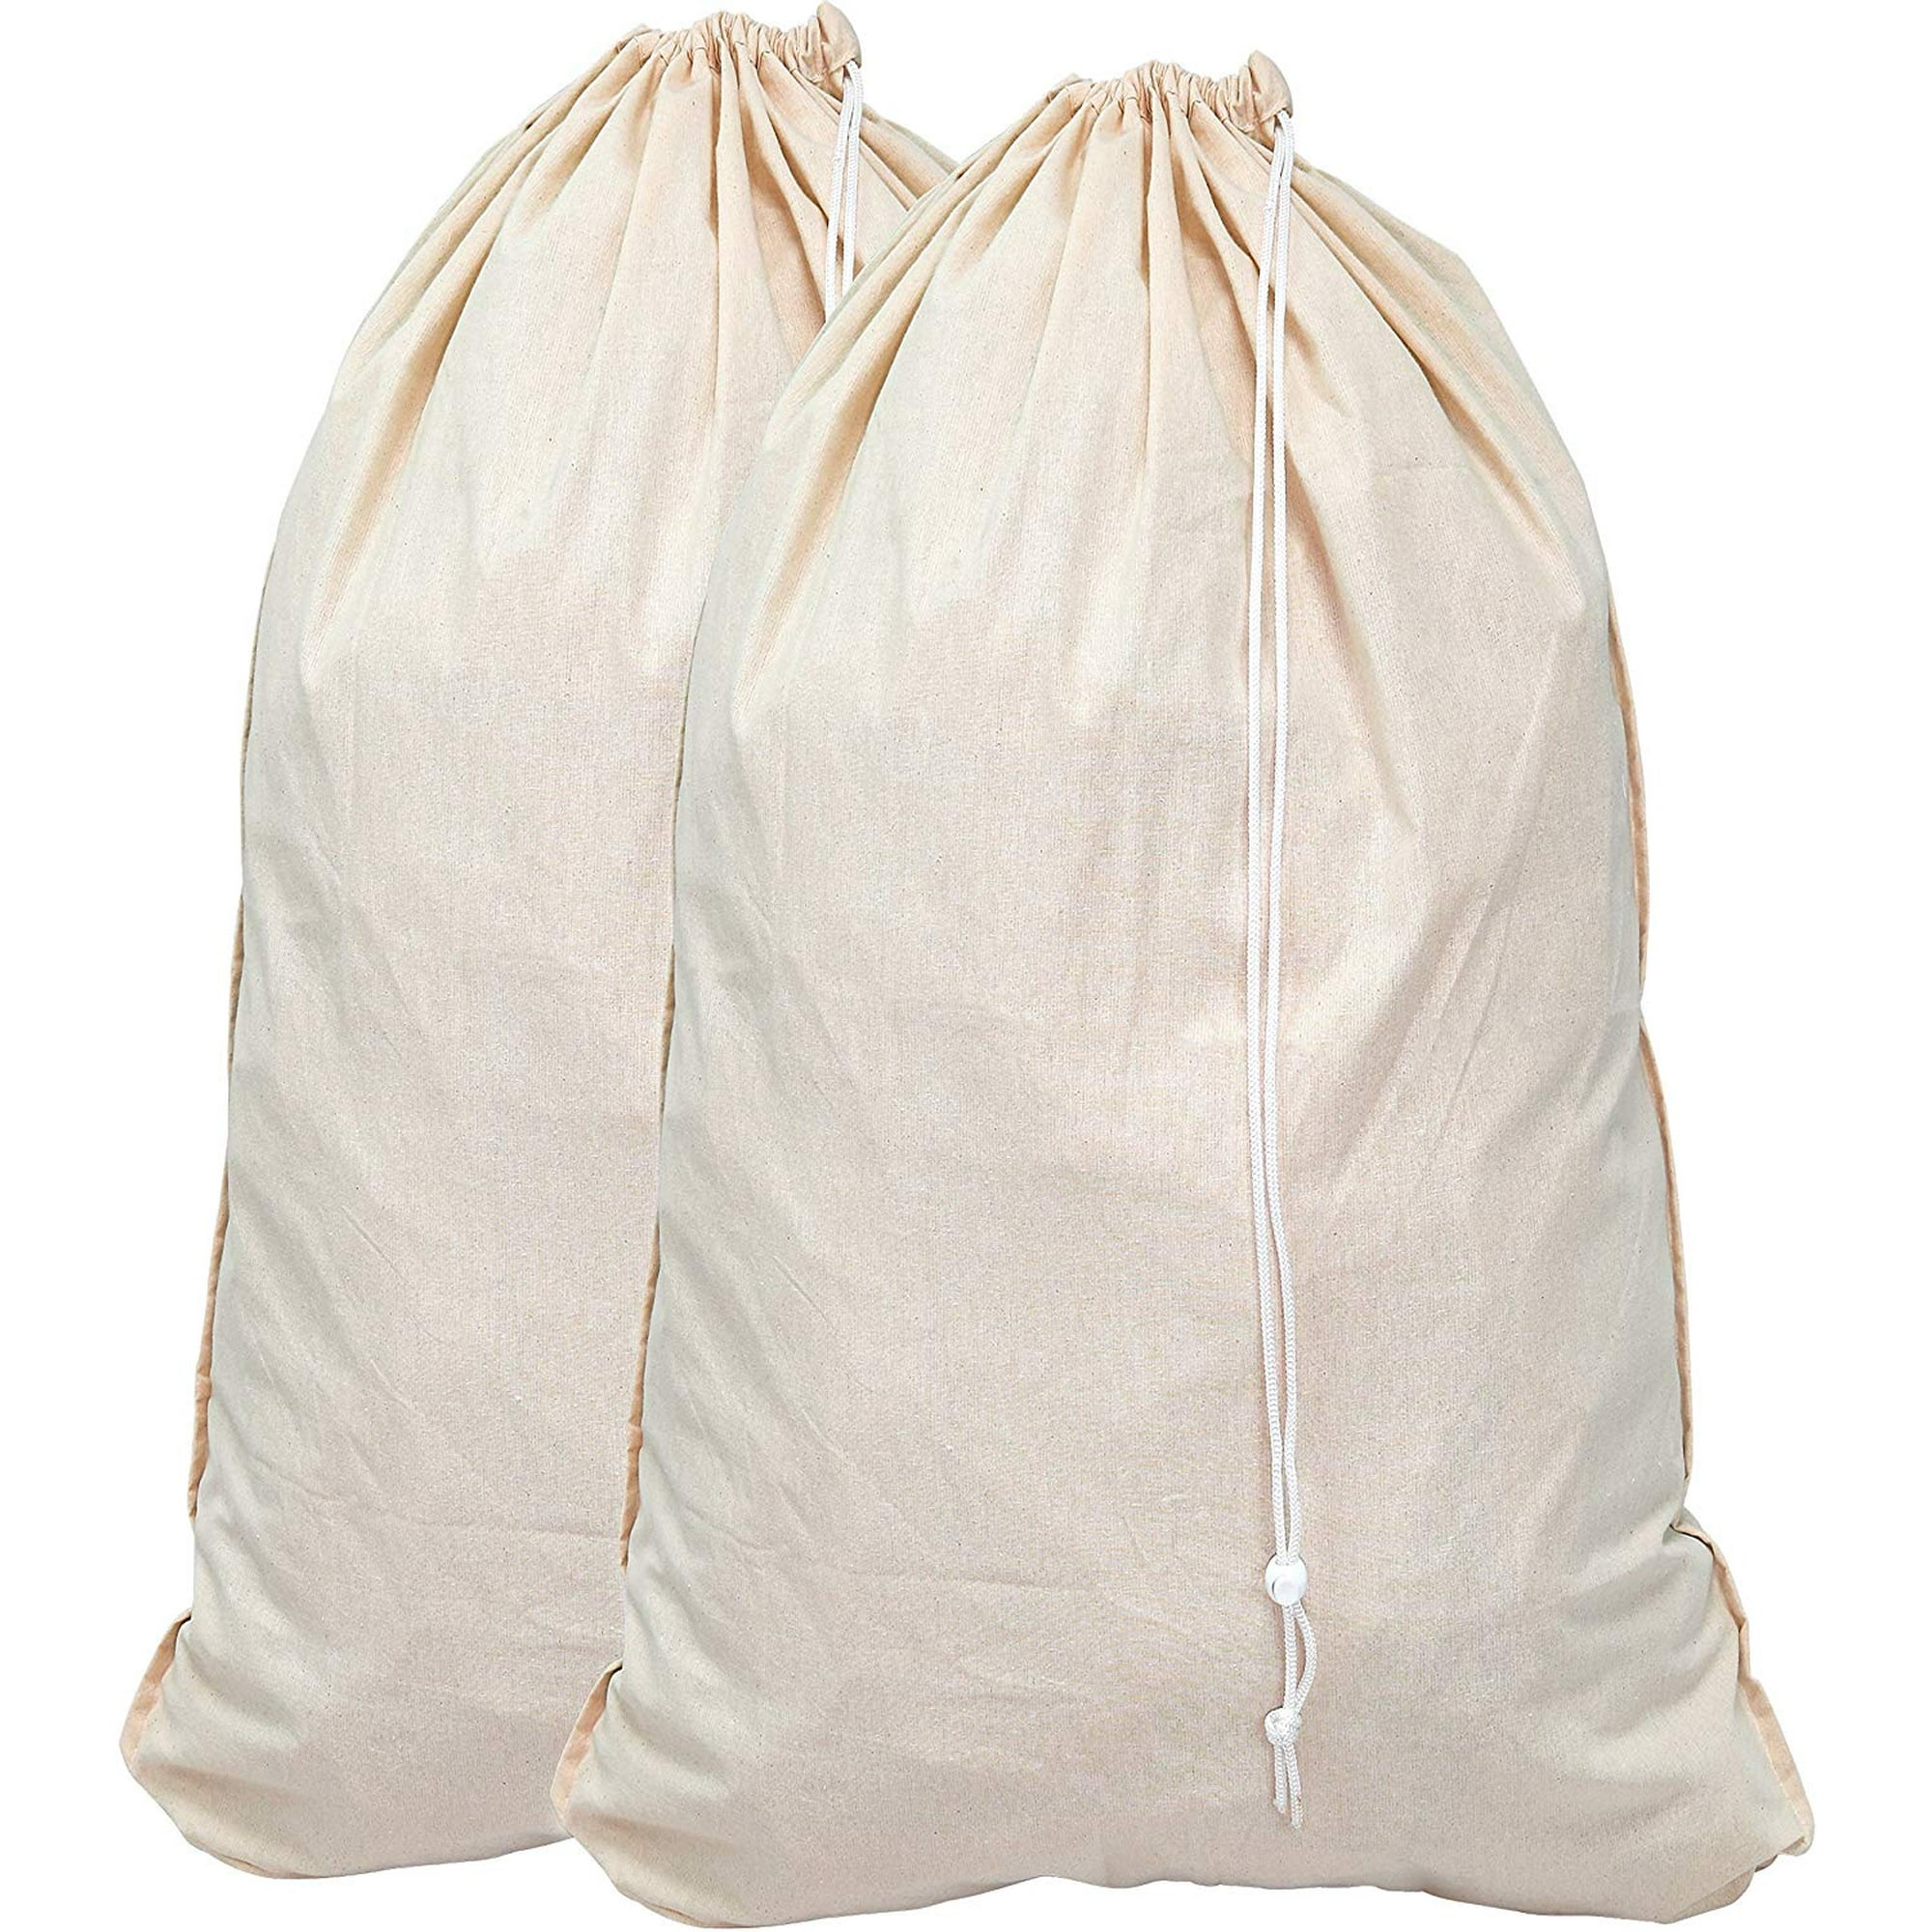 2 Pack - Extra Large Natural Cotton Laundry Bag, Beige (28 x 36)